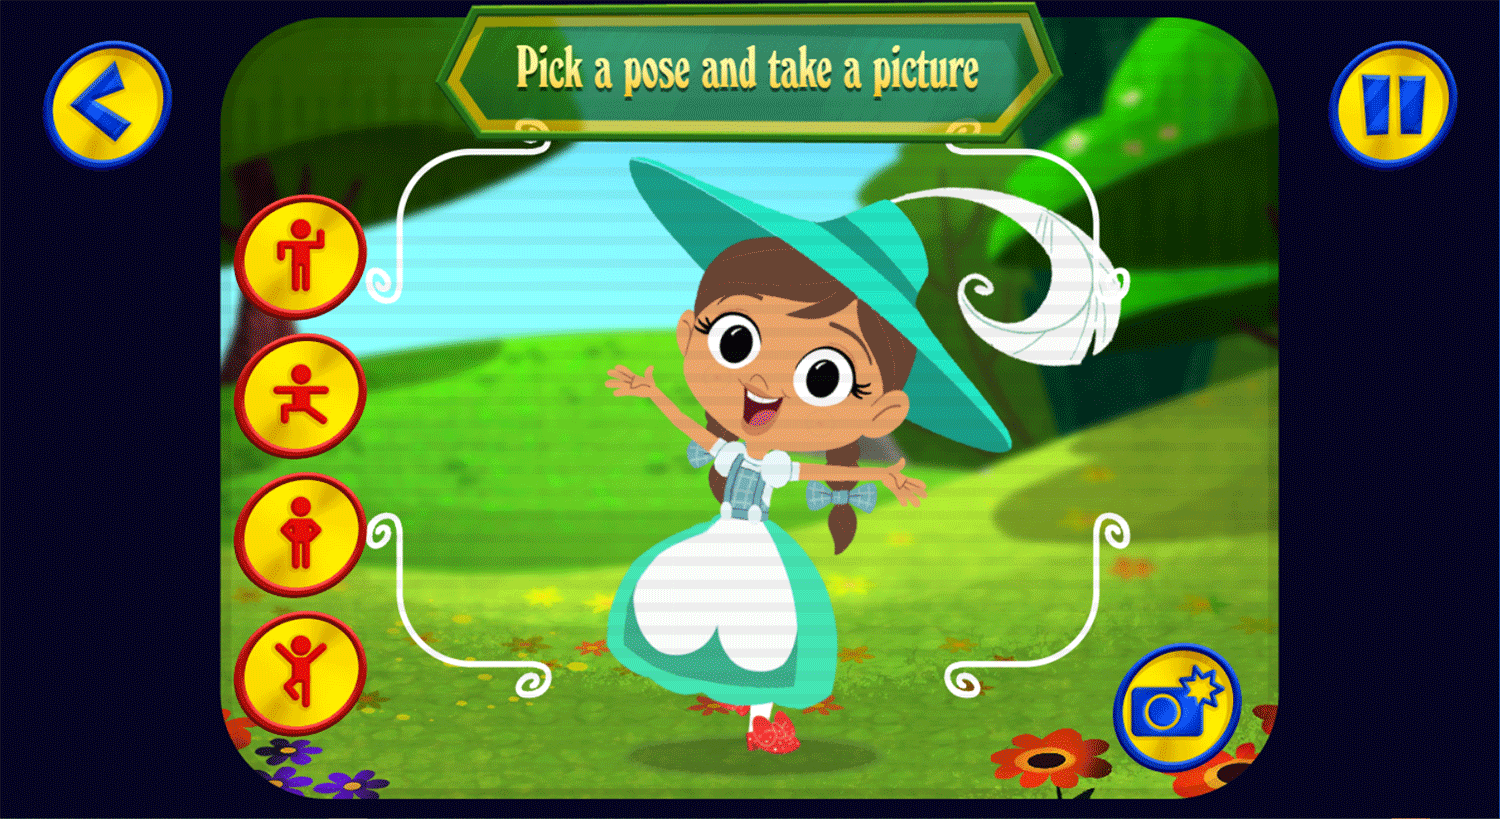 Dorothy and the Wizard of Oz Dress Up Game Pick Pose Screenshot.